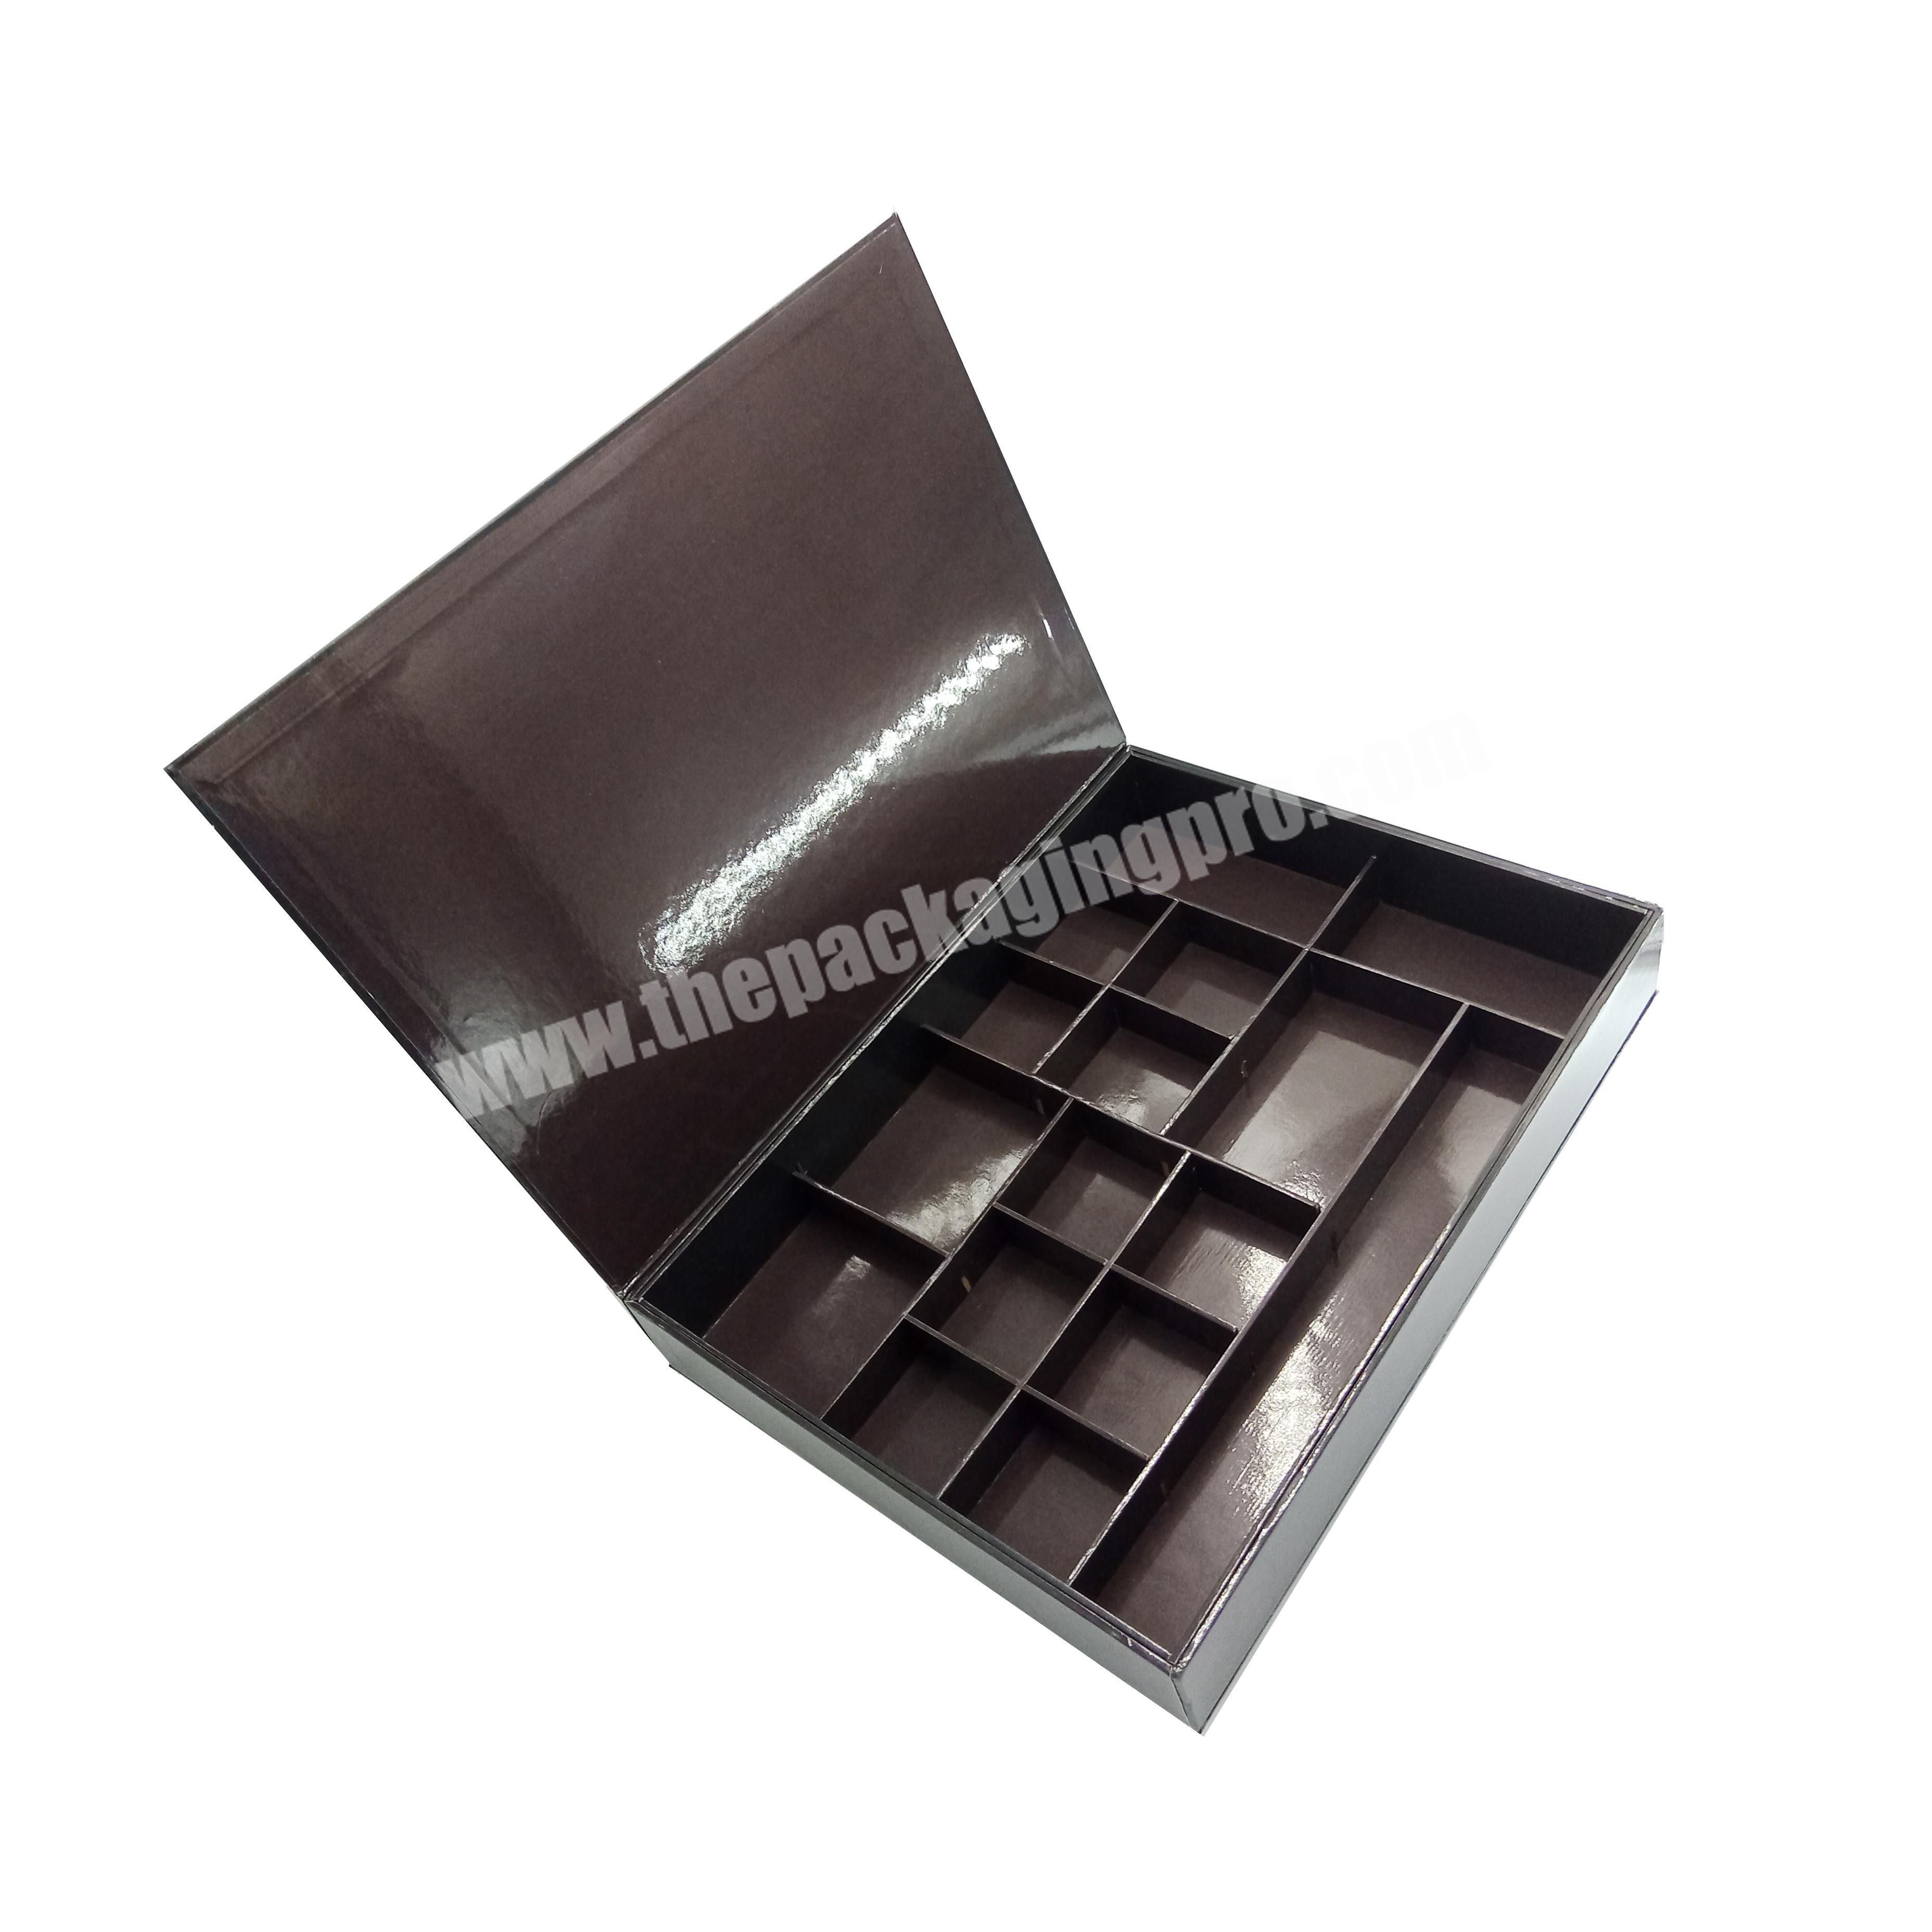 OEM chocolate paper box wholesale FULL COLOR PRINTED BOOK SHAPE FANCY FOR PACKING GIFT WITH INSERTS FOLDING TEA BAGS